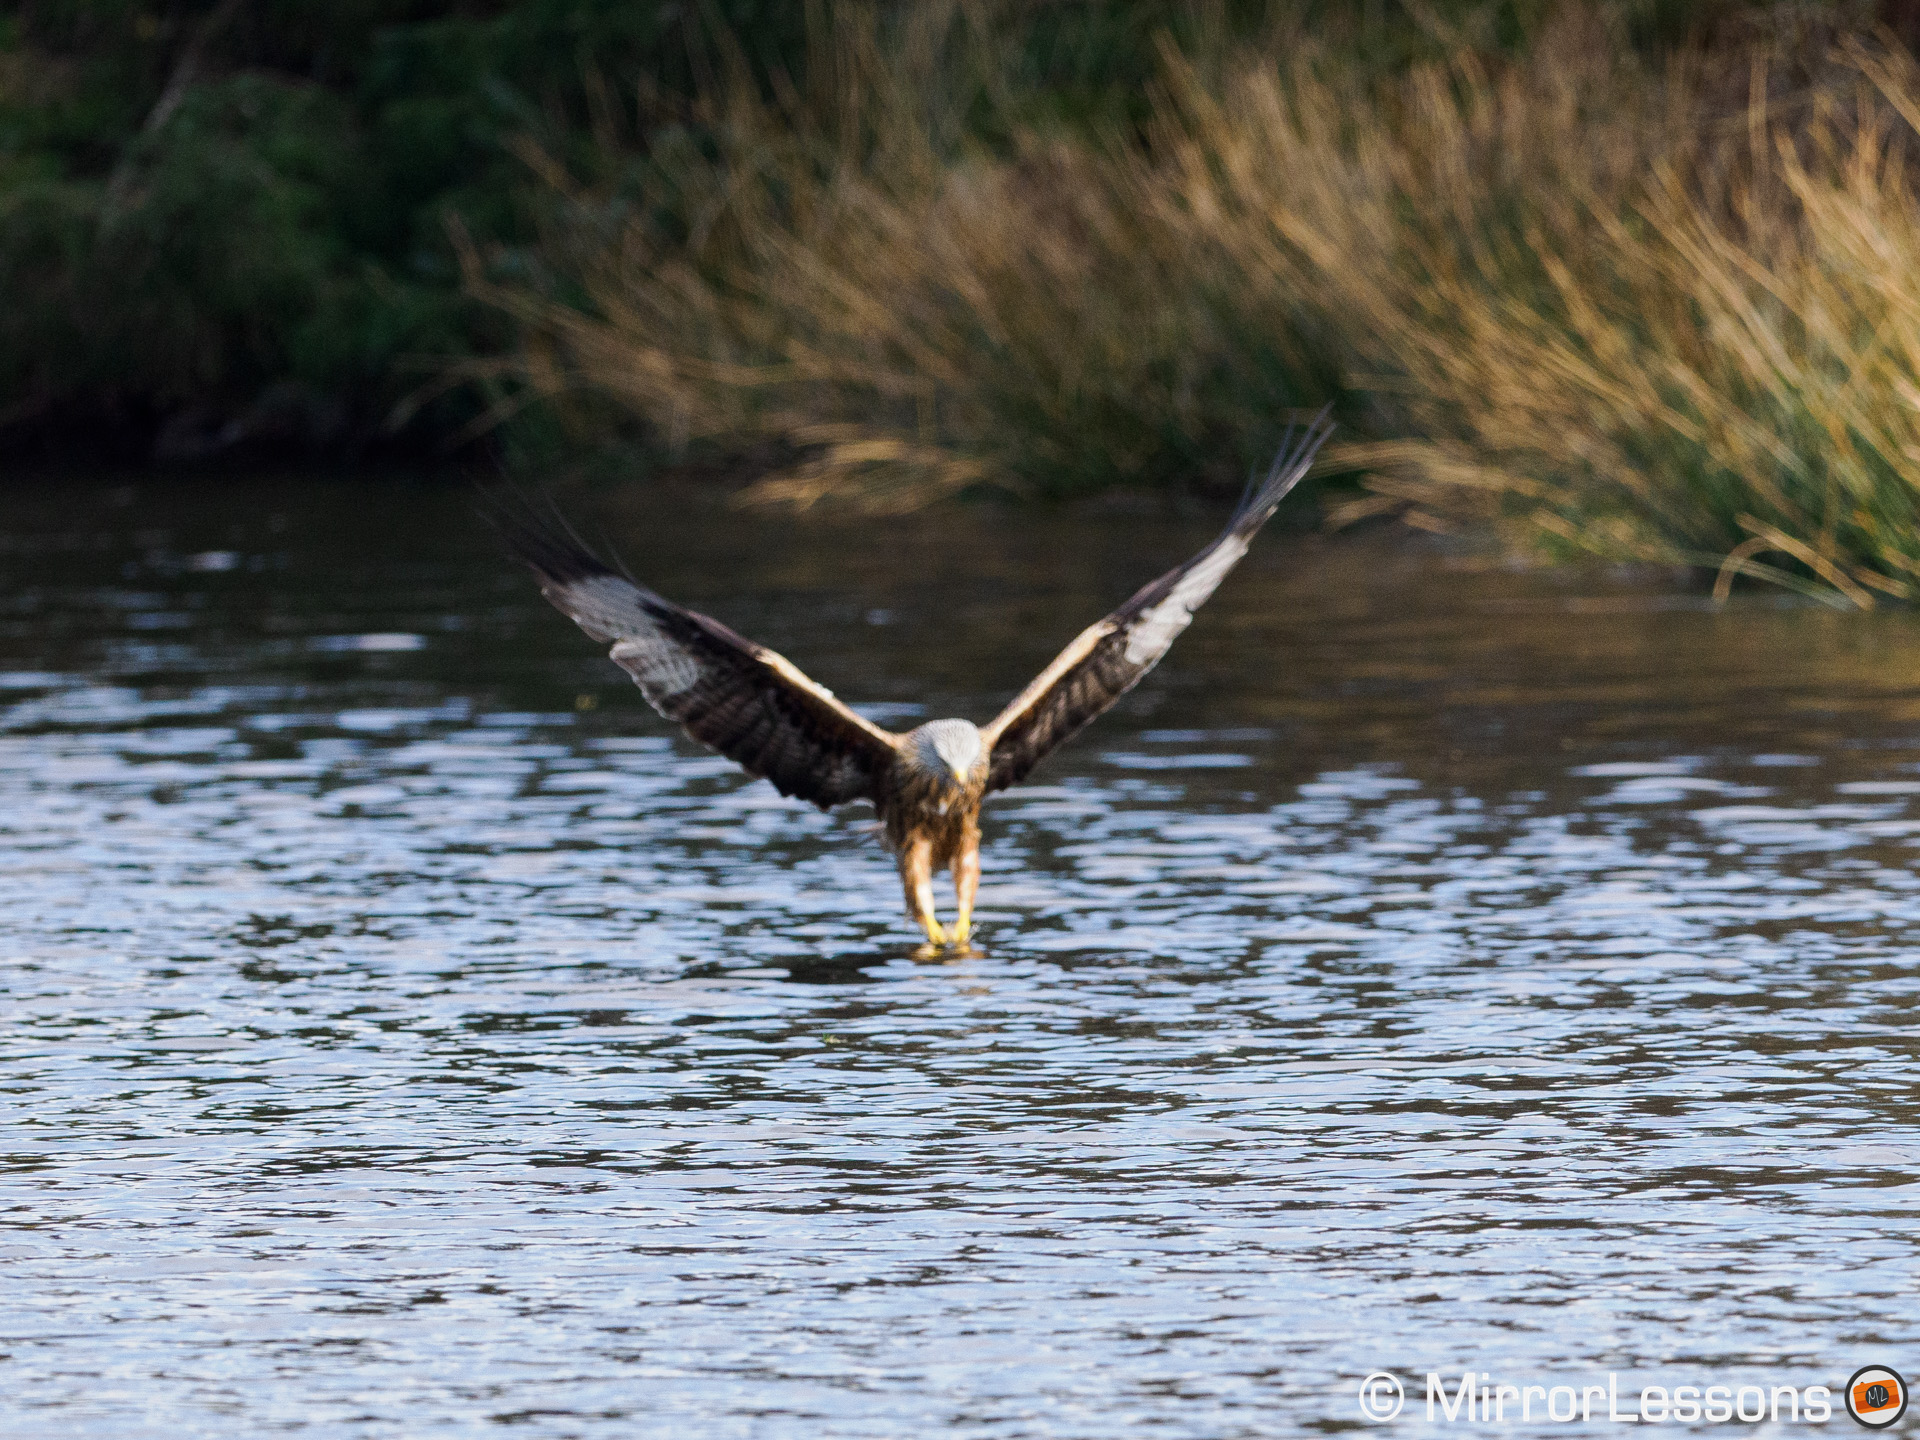 red kite grabbing a piece of meat in the water. Image is out of focus.